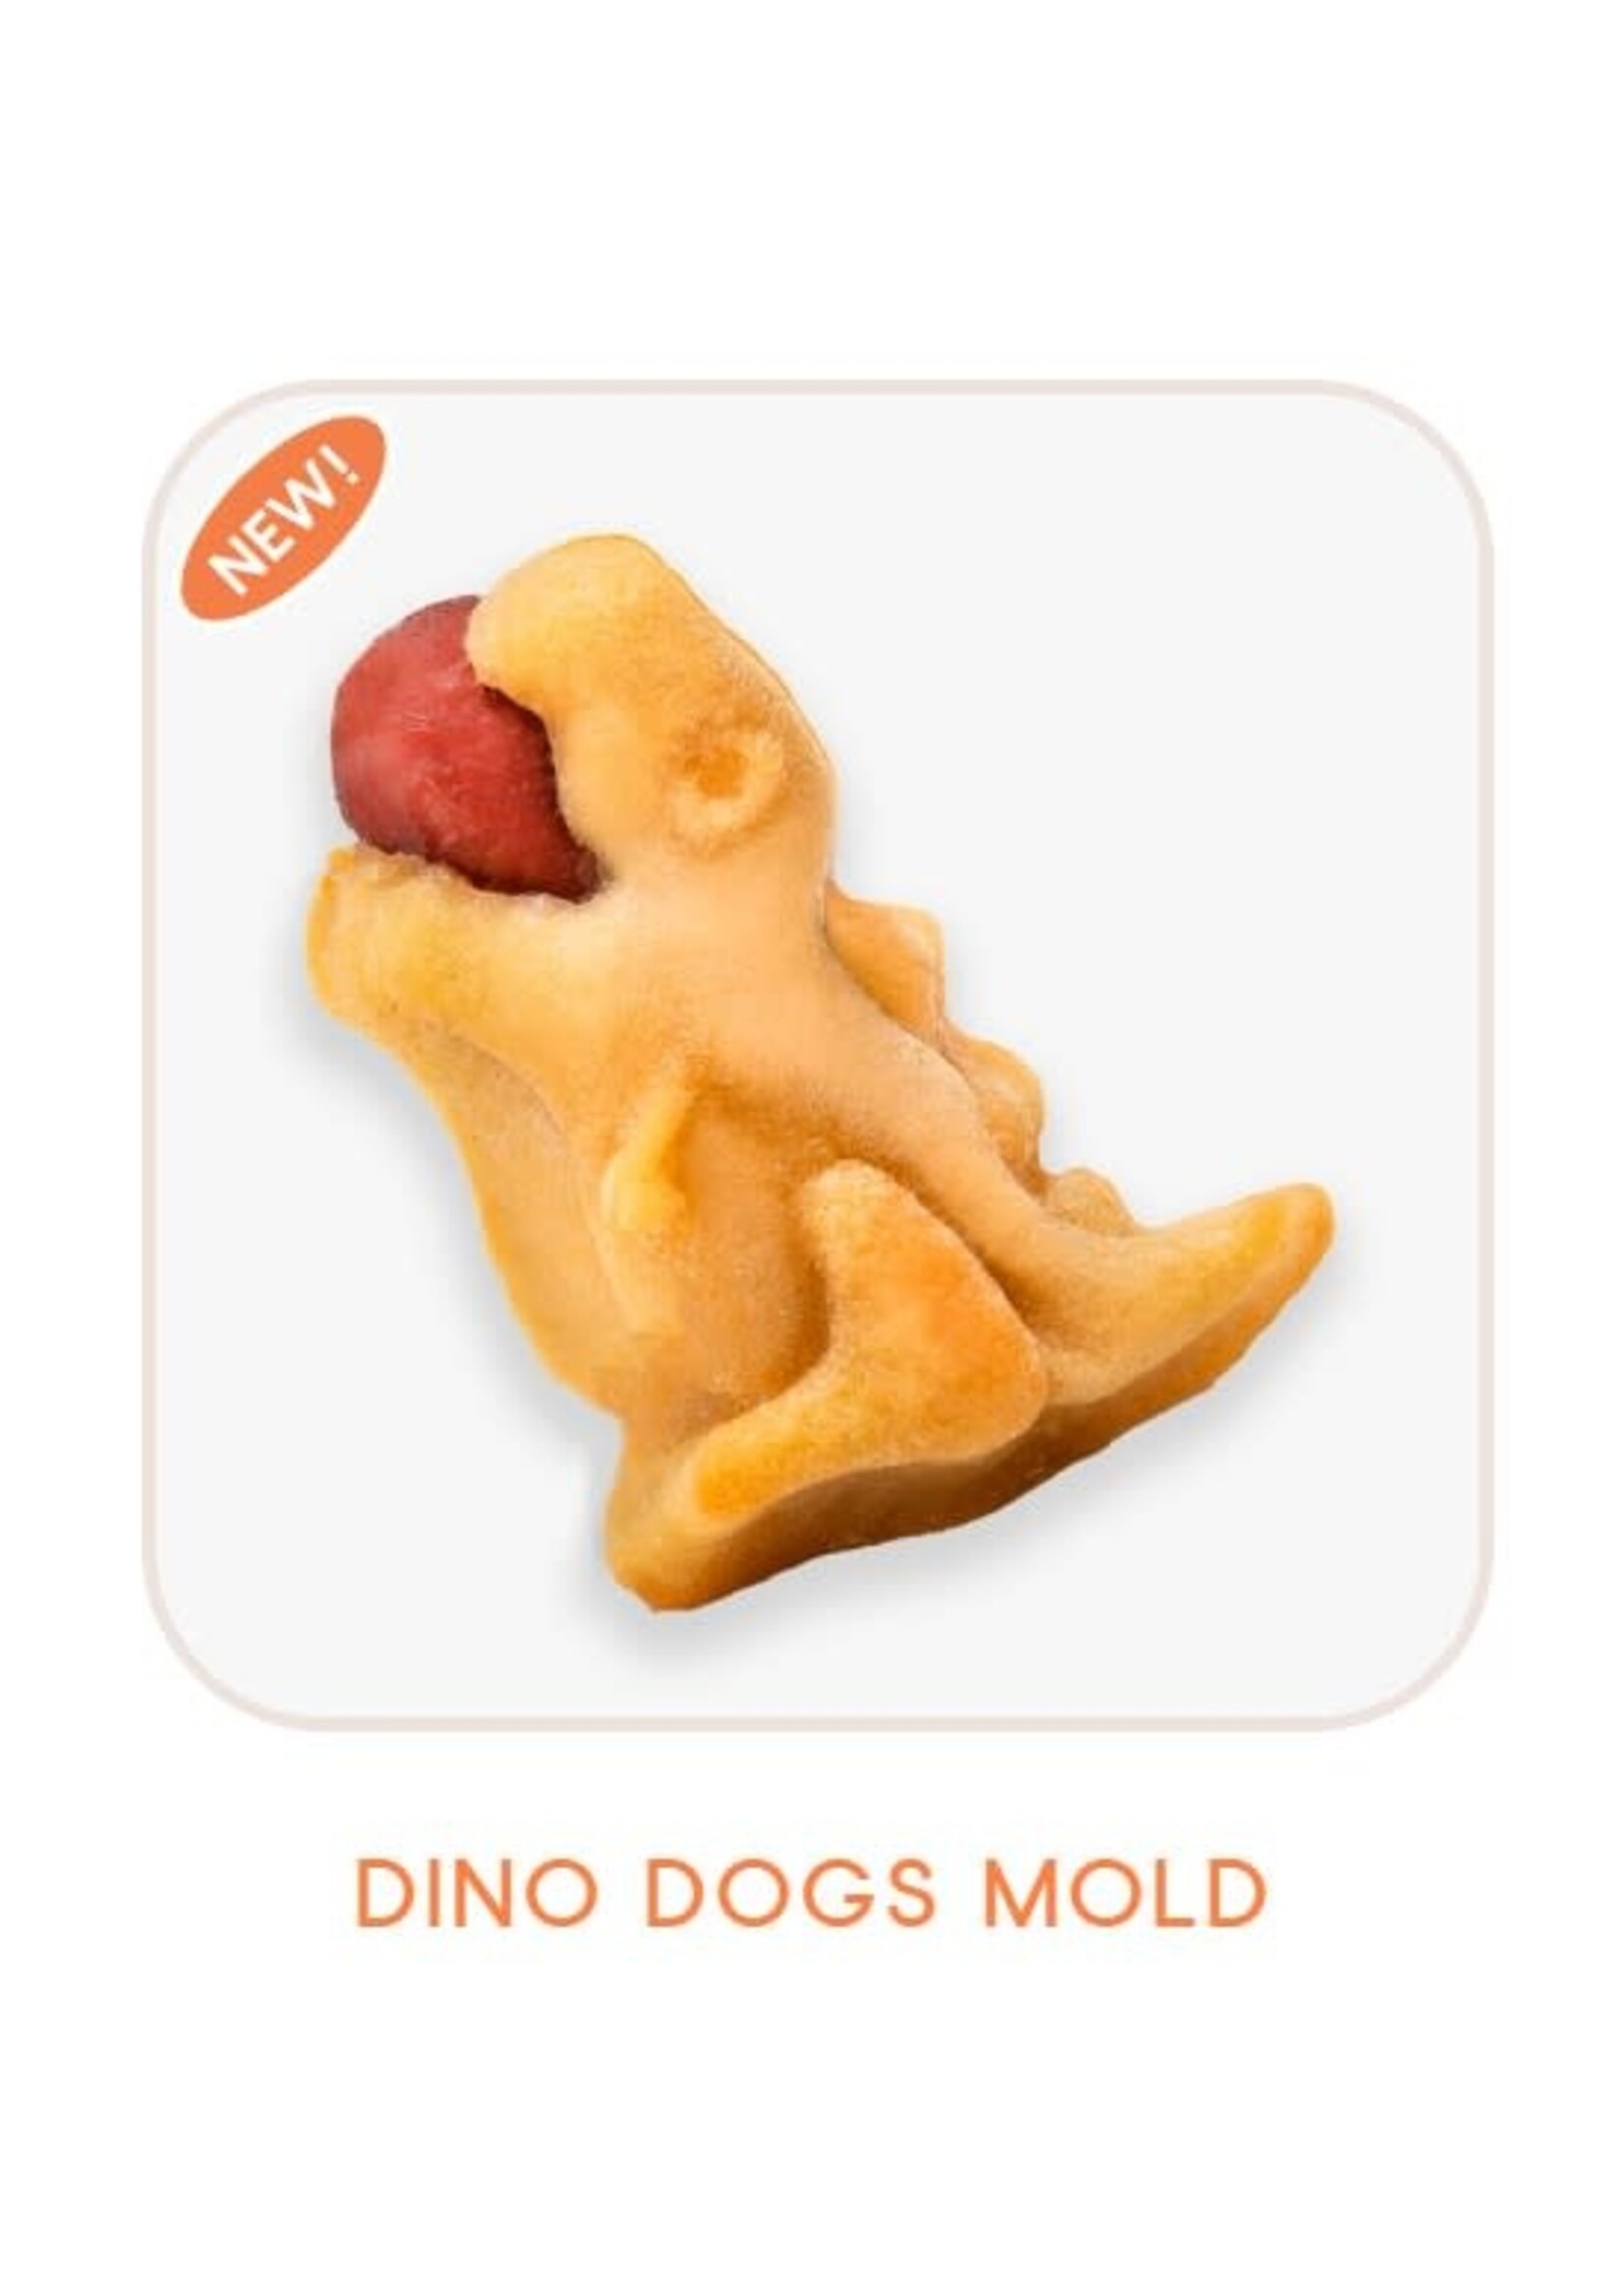 Dino Dogs Silicone Mold - All Seasons Floral & Gifts